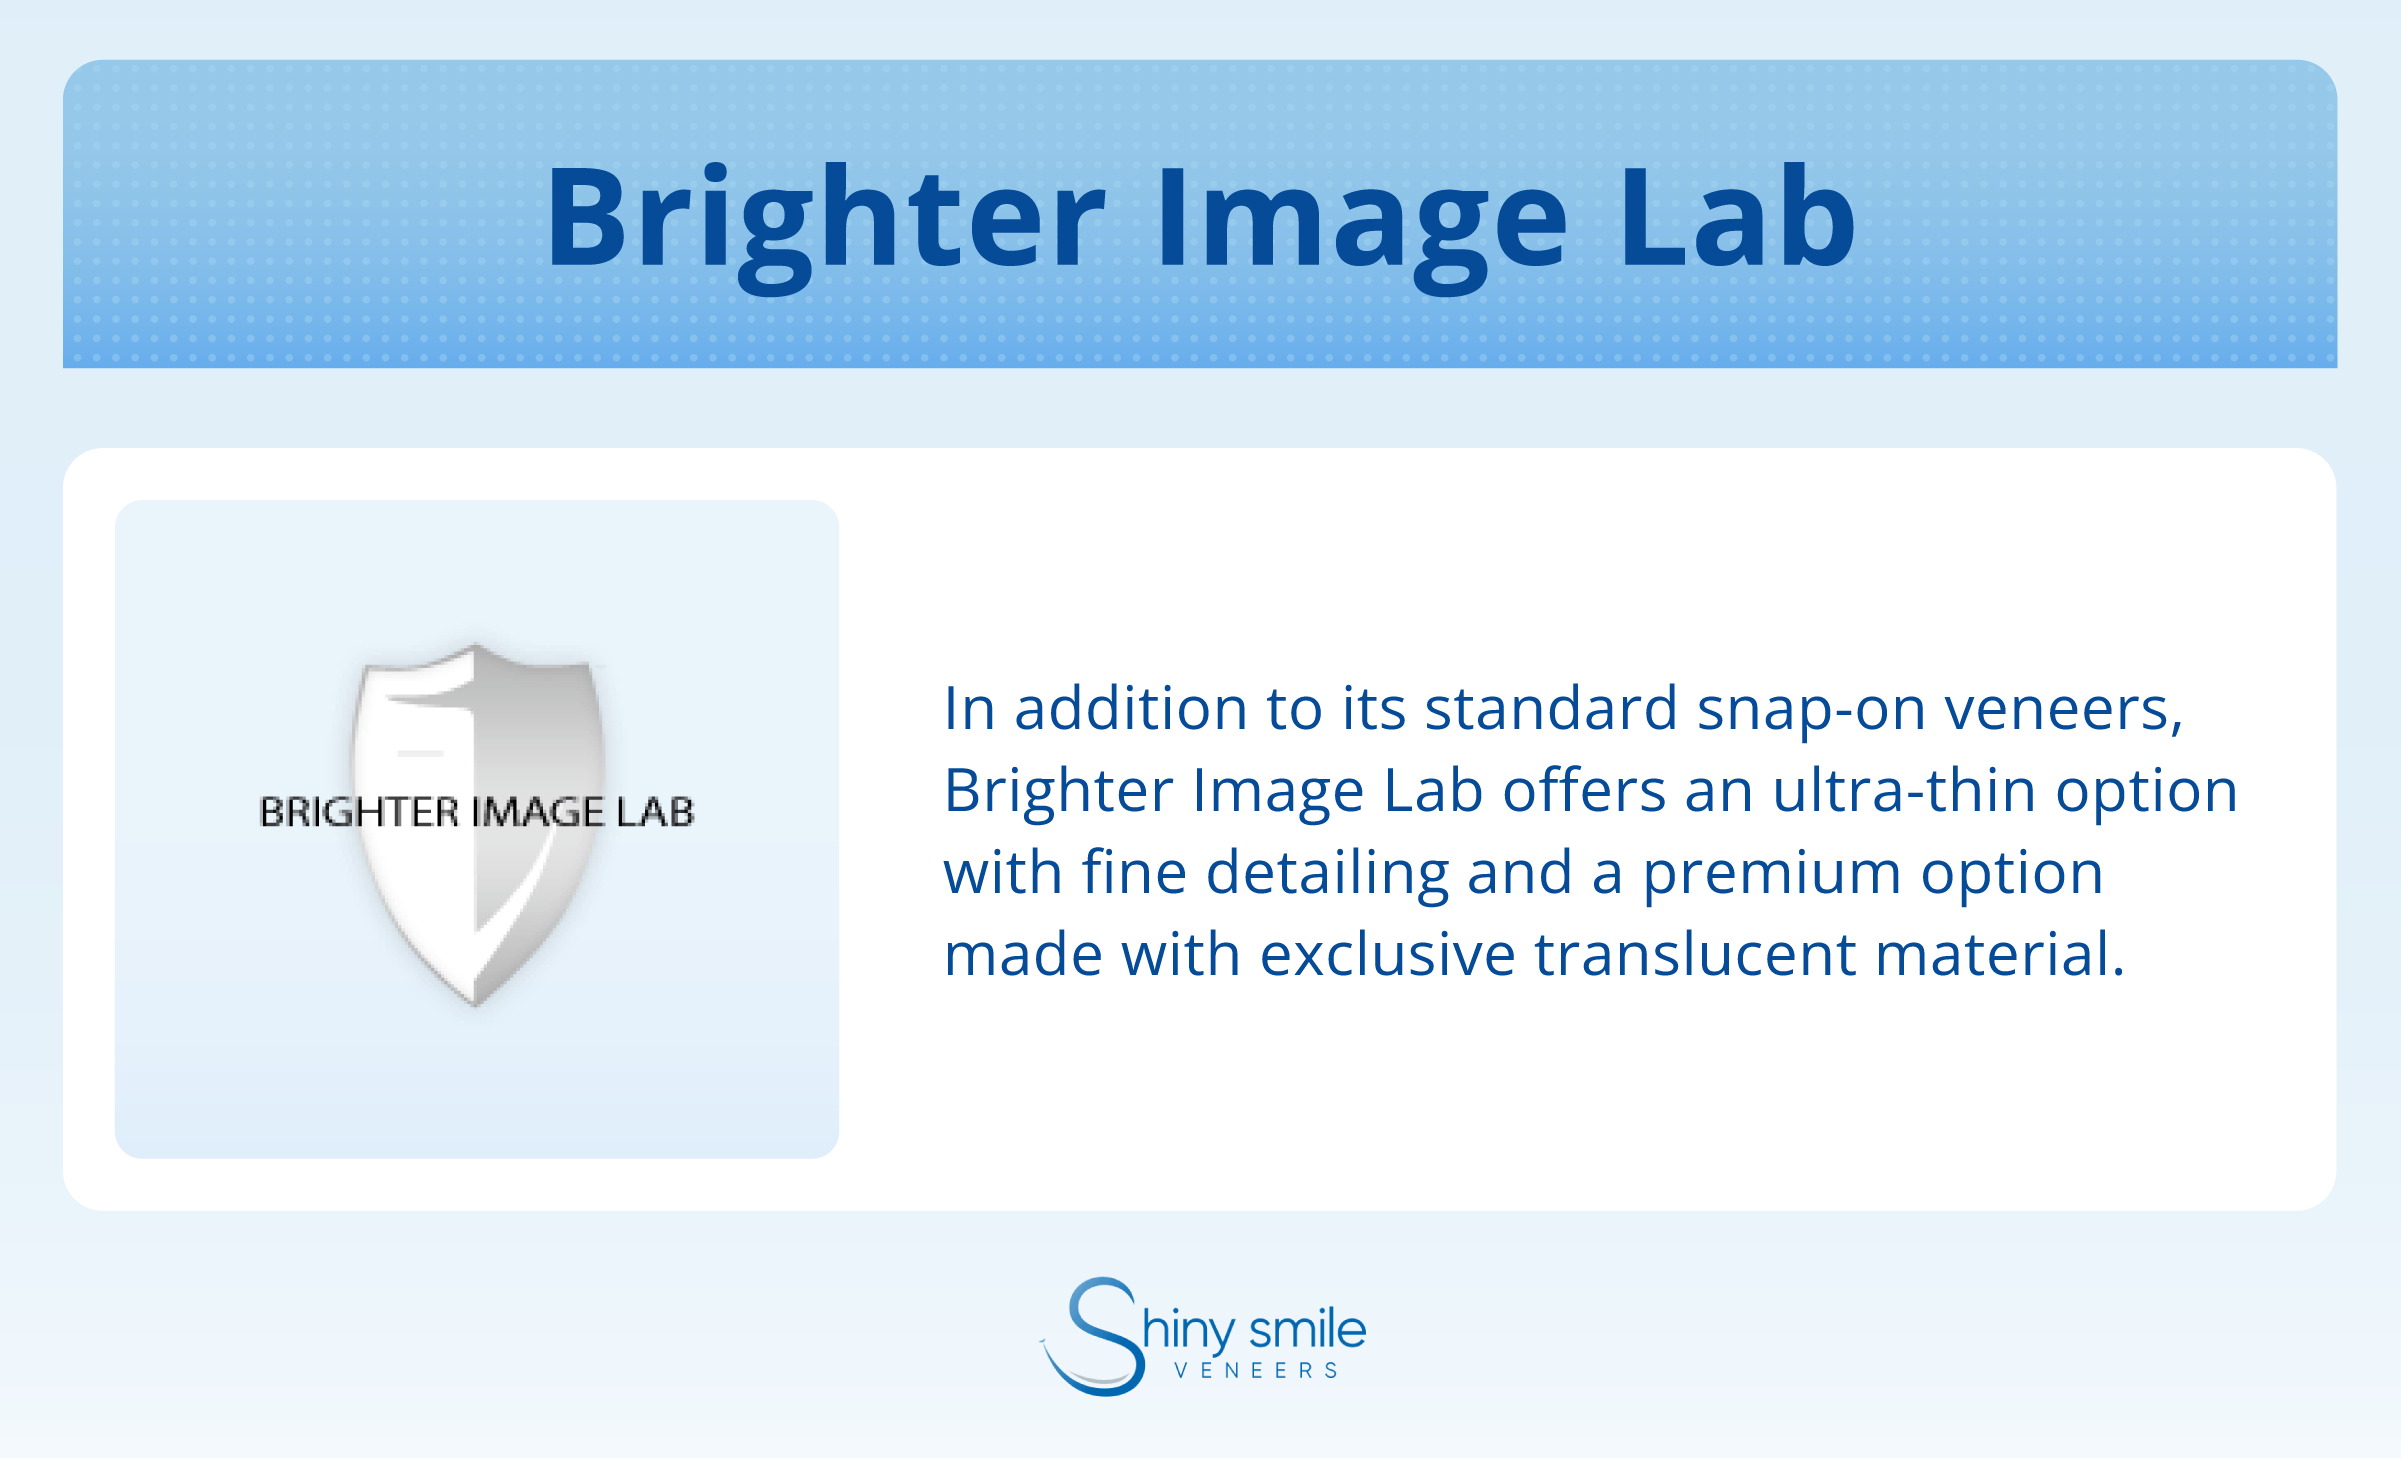 about Brighter Image Lab